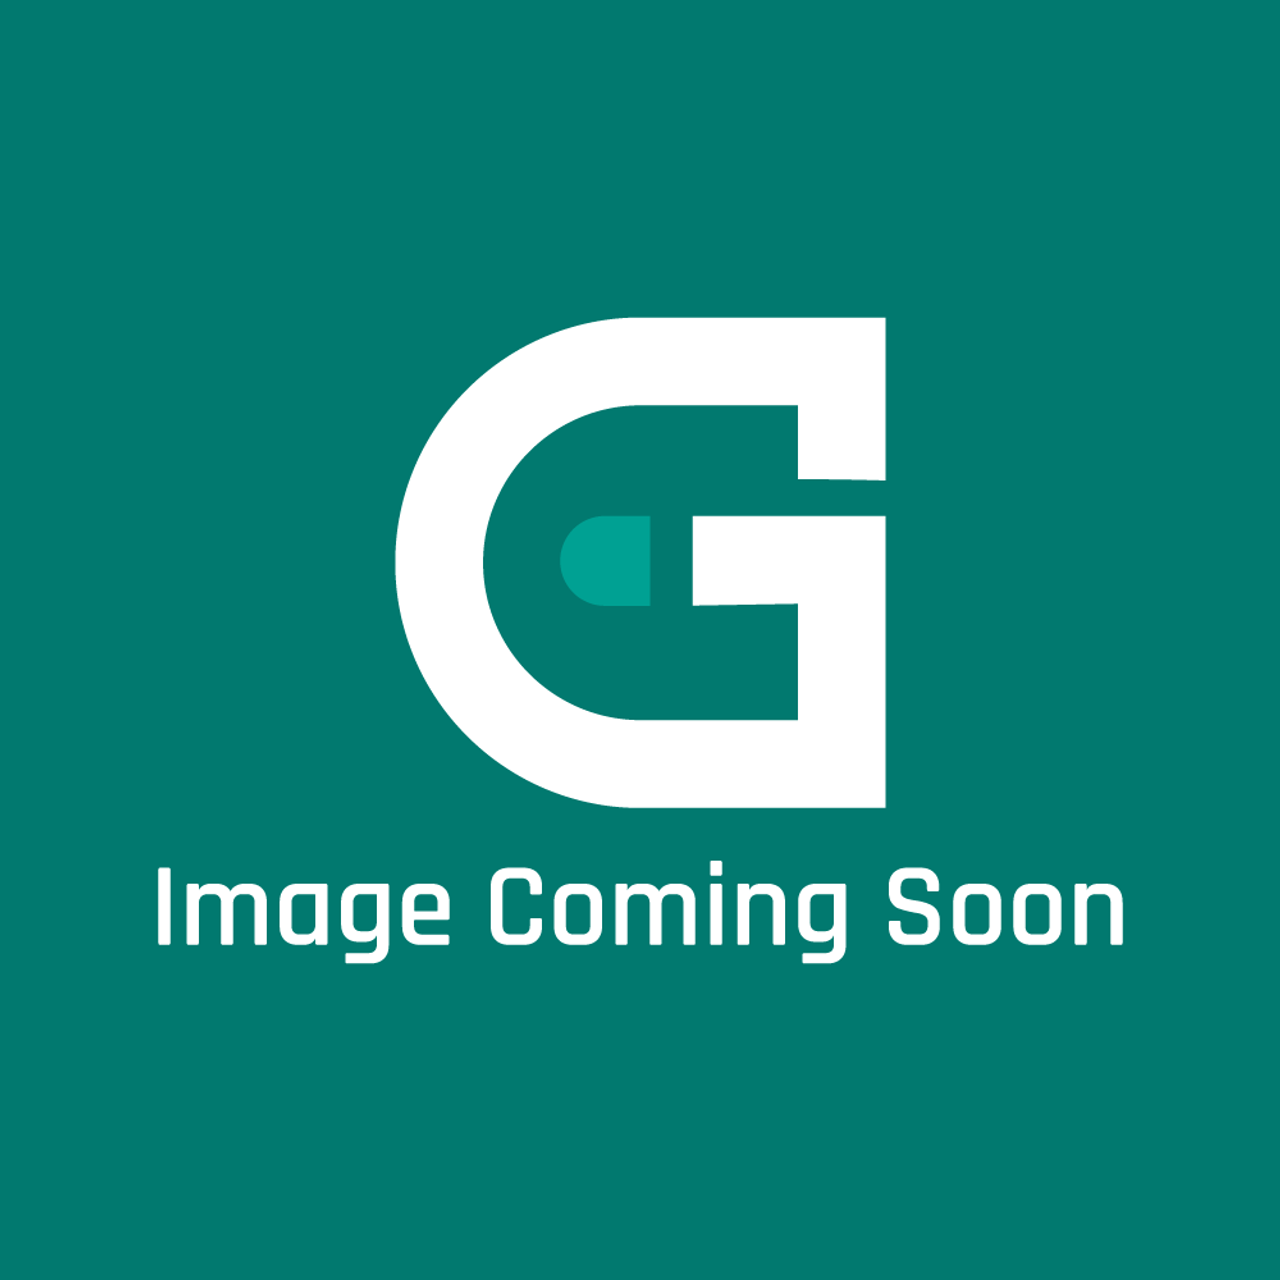 AGA Marvel A1348 - Bottom Plate Simm Oven (81090) - Image Coming Soon!